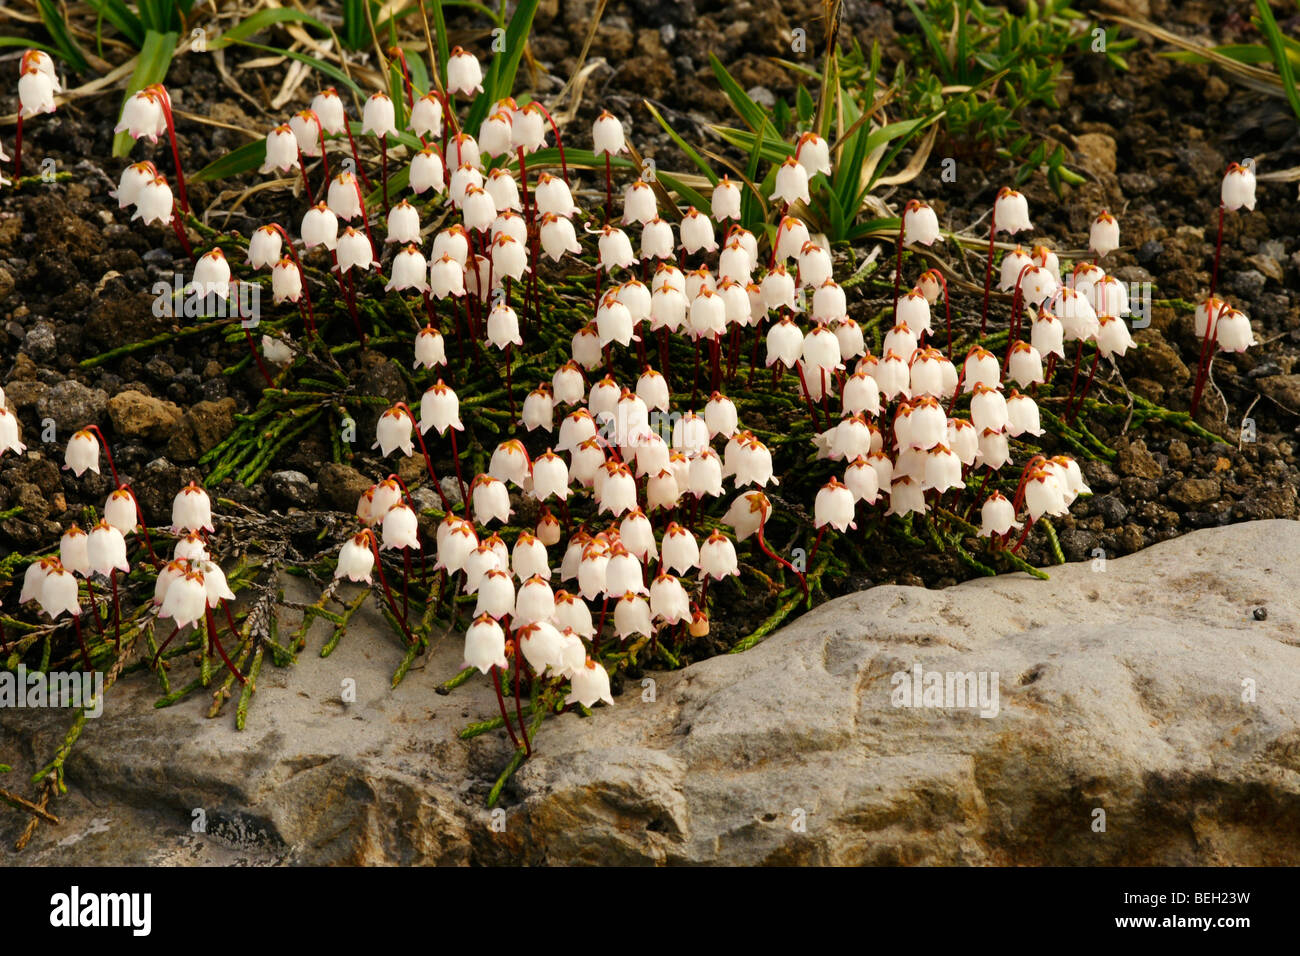 Cassiope lycopodioides. Stock Photo